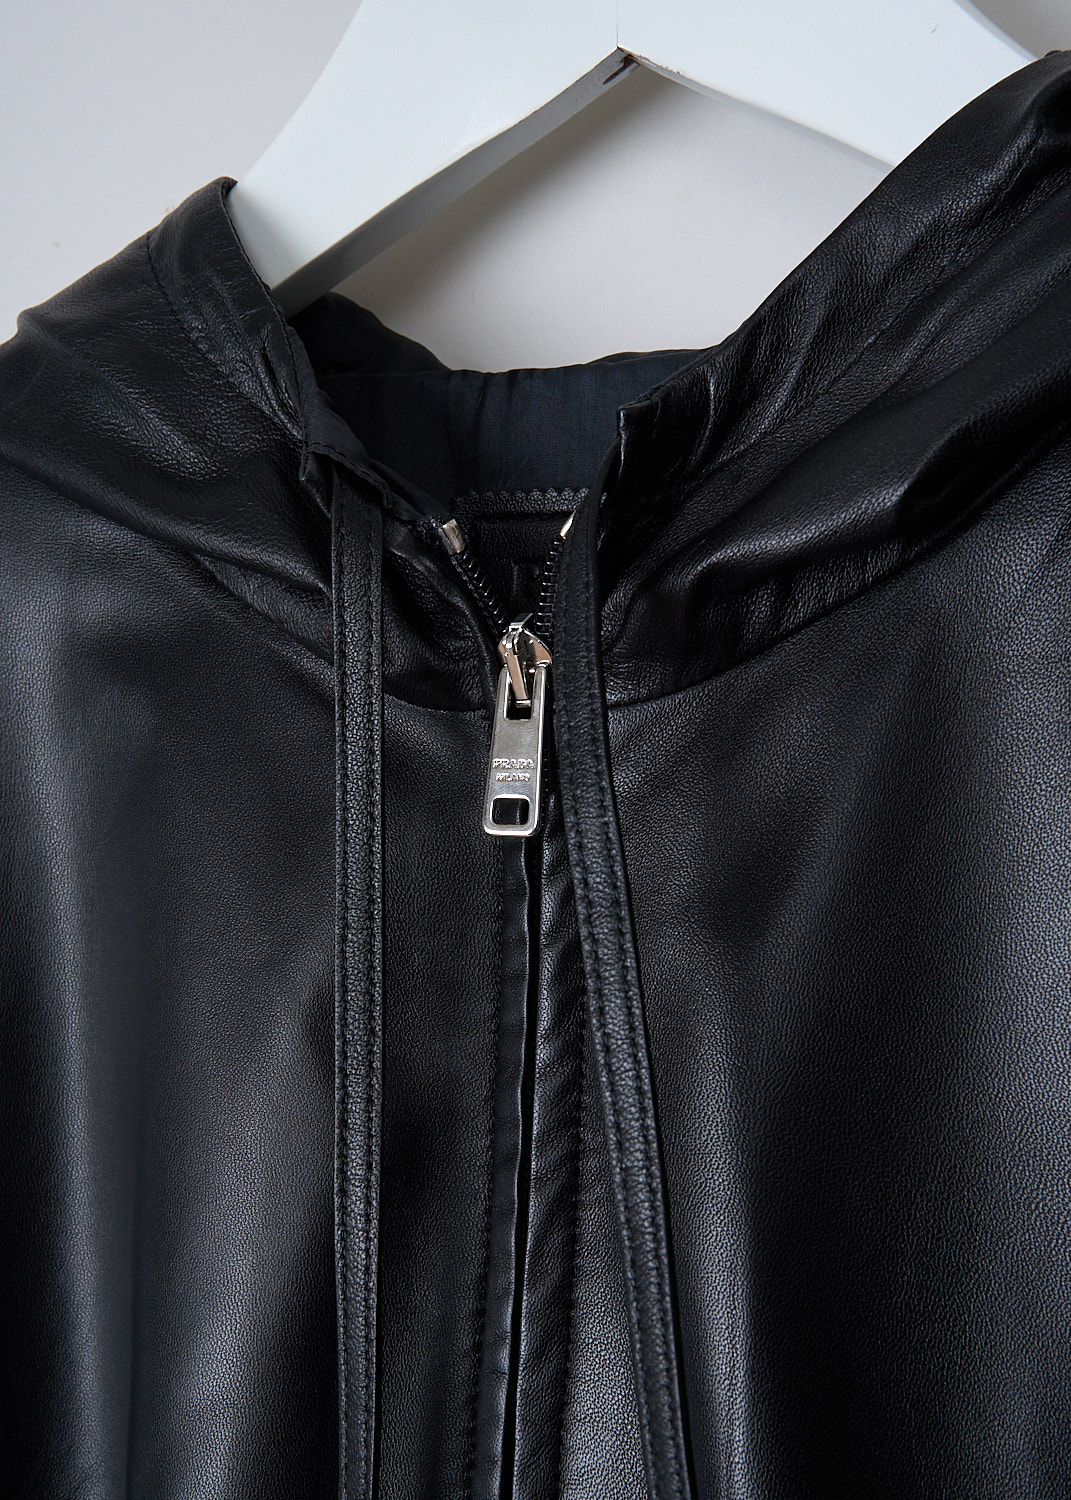 PRADA, BLACK HOODED LEATHER JACKET, 58853_JHI_F0002_NAPPA_NERO, Black, Detail, This black leather jacket has a hood with drawstrings. The jacket has a silver-tone two-way zipper in the front. Slanted welt pockets can be found in the front. The jacket has a stormflap in the front and back. The straight hemline has drawstring. The jacket has a wider silhouette. 
